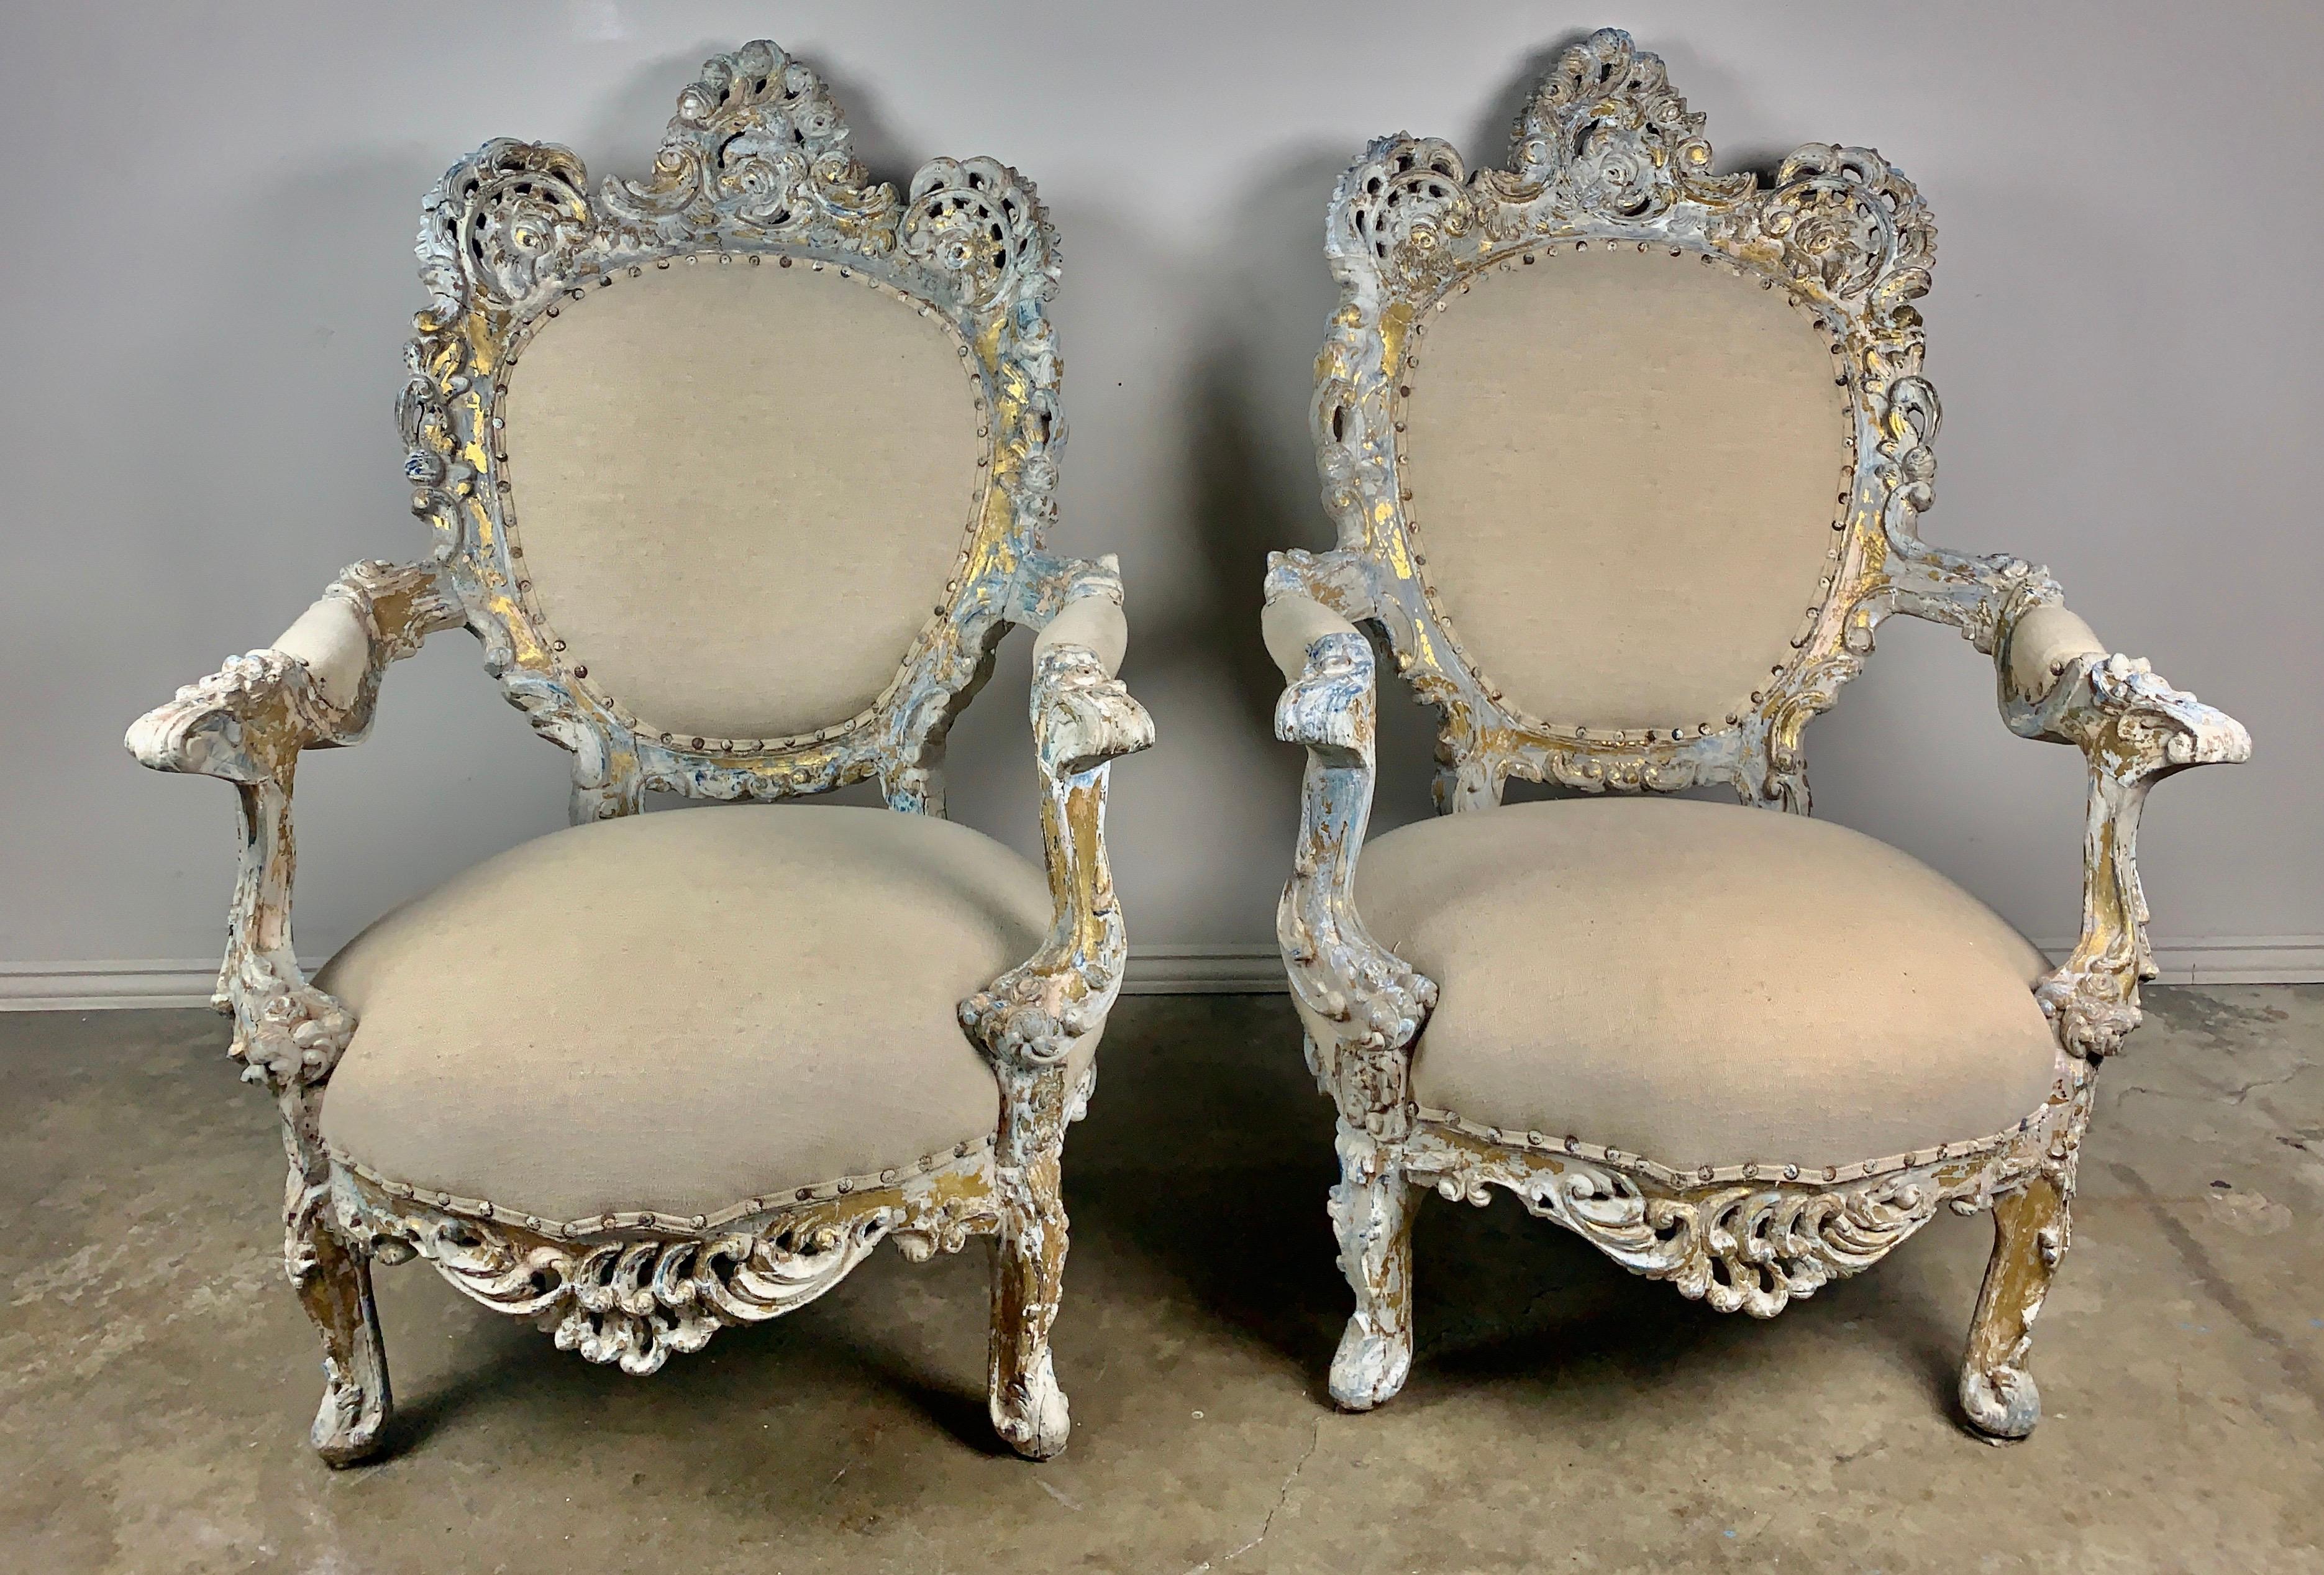 Pair of 19th century French painted and parcel gilt Rococo style armchairs upholstered in an oatmeal colored Belgium linen with original nailhead trim detail.
   